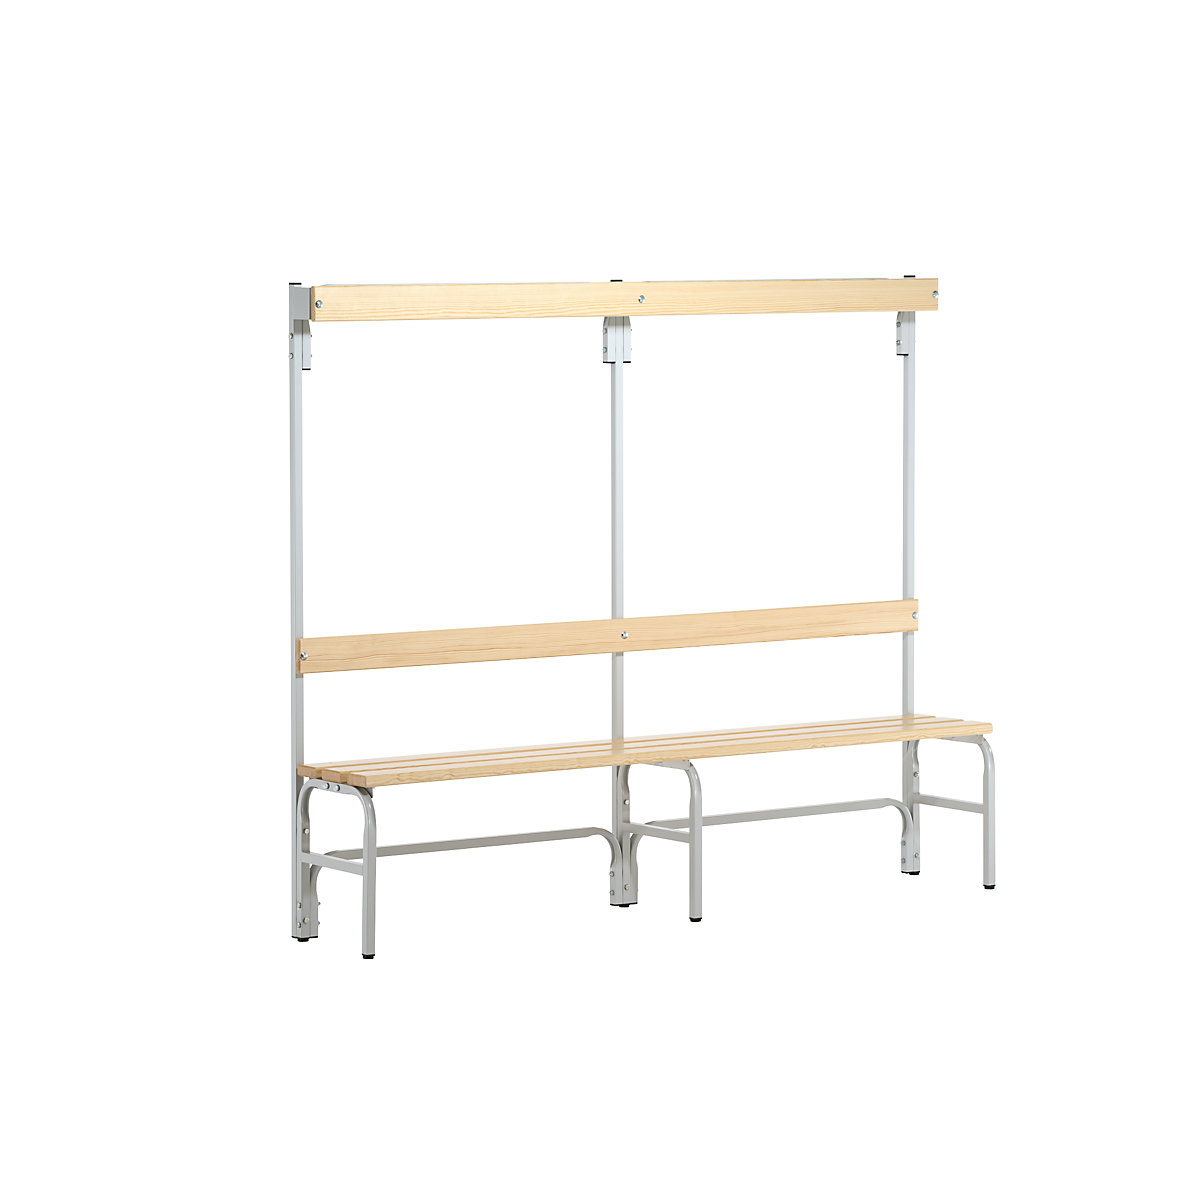 Sypro – Cloakroom bench with hook strips, on one side, 4 hooks 1500 mm, light grey